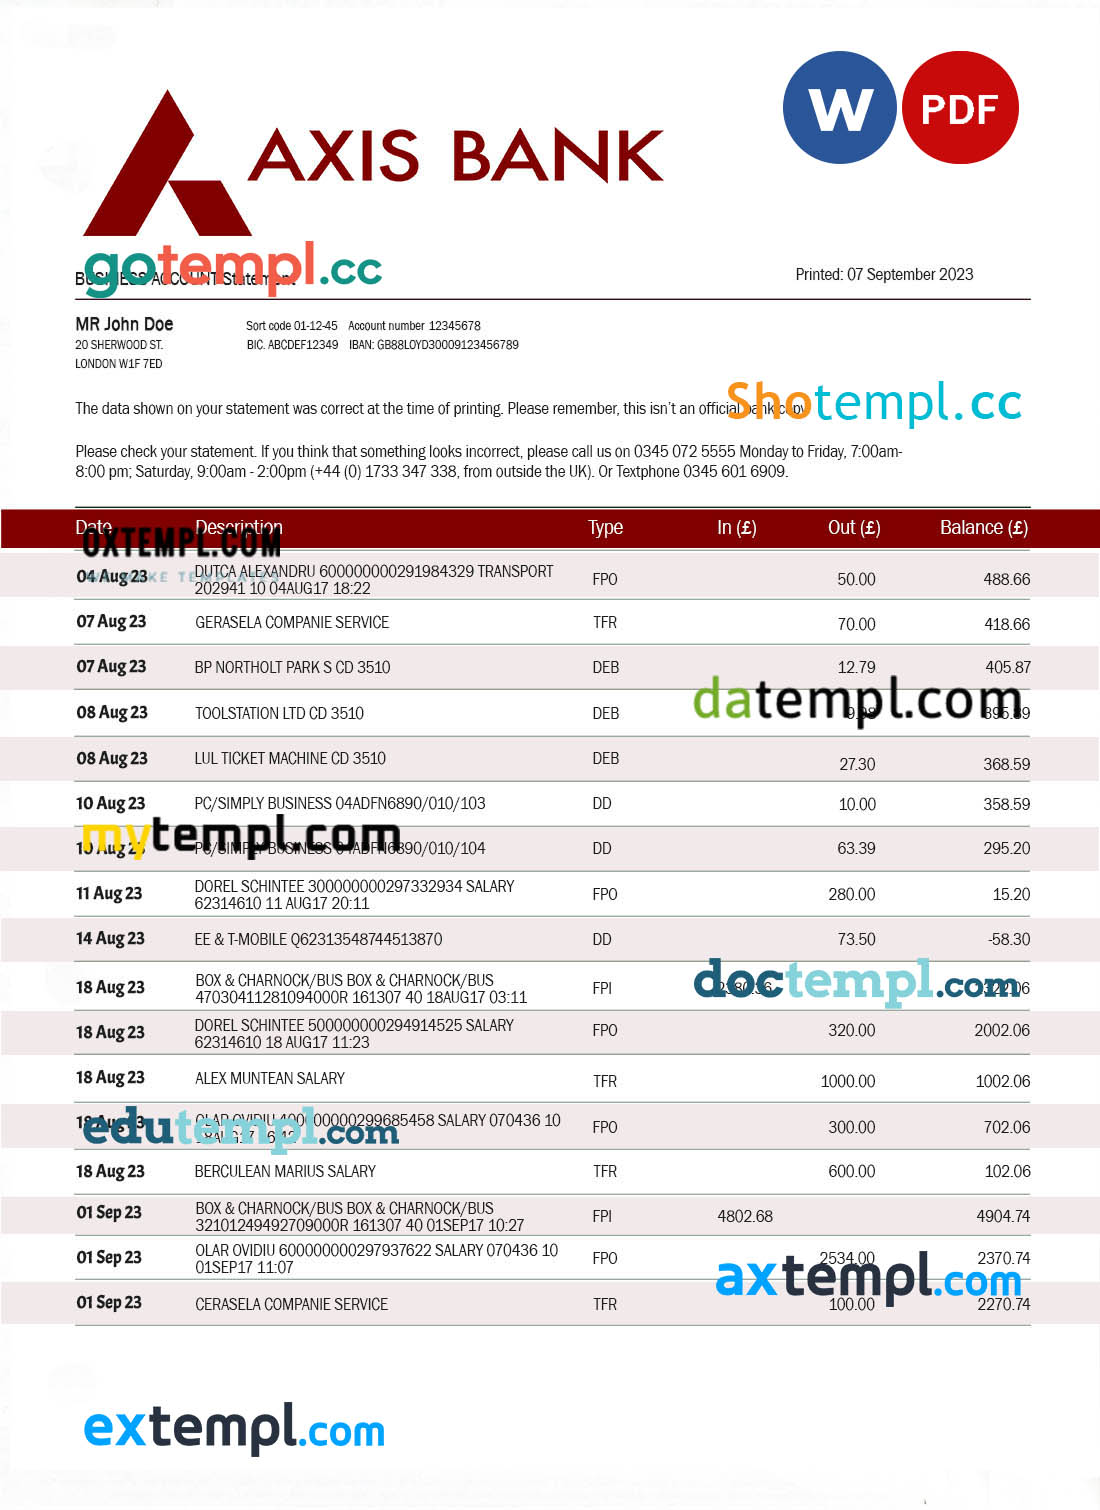 Axis Bank enterprise statement Word and PDF template